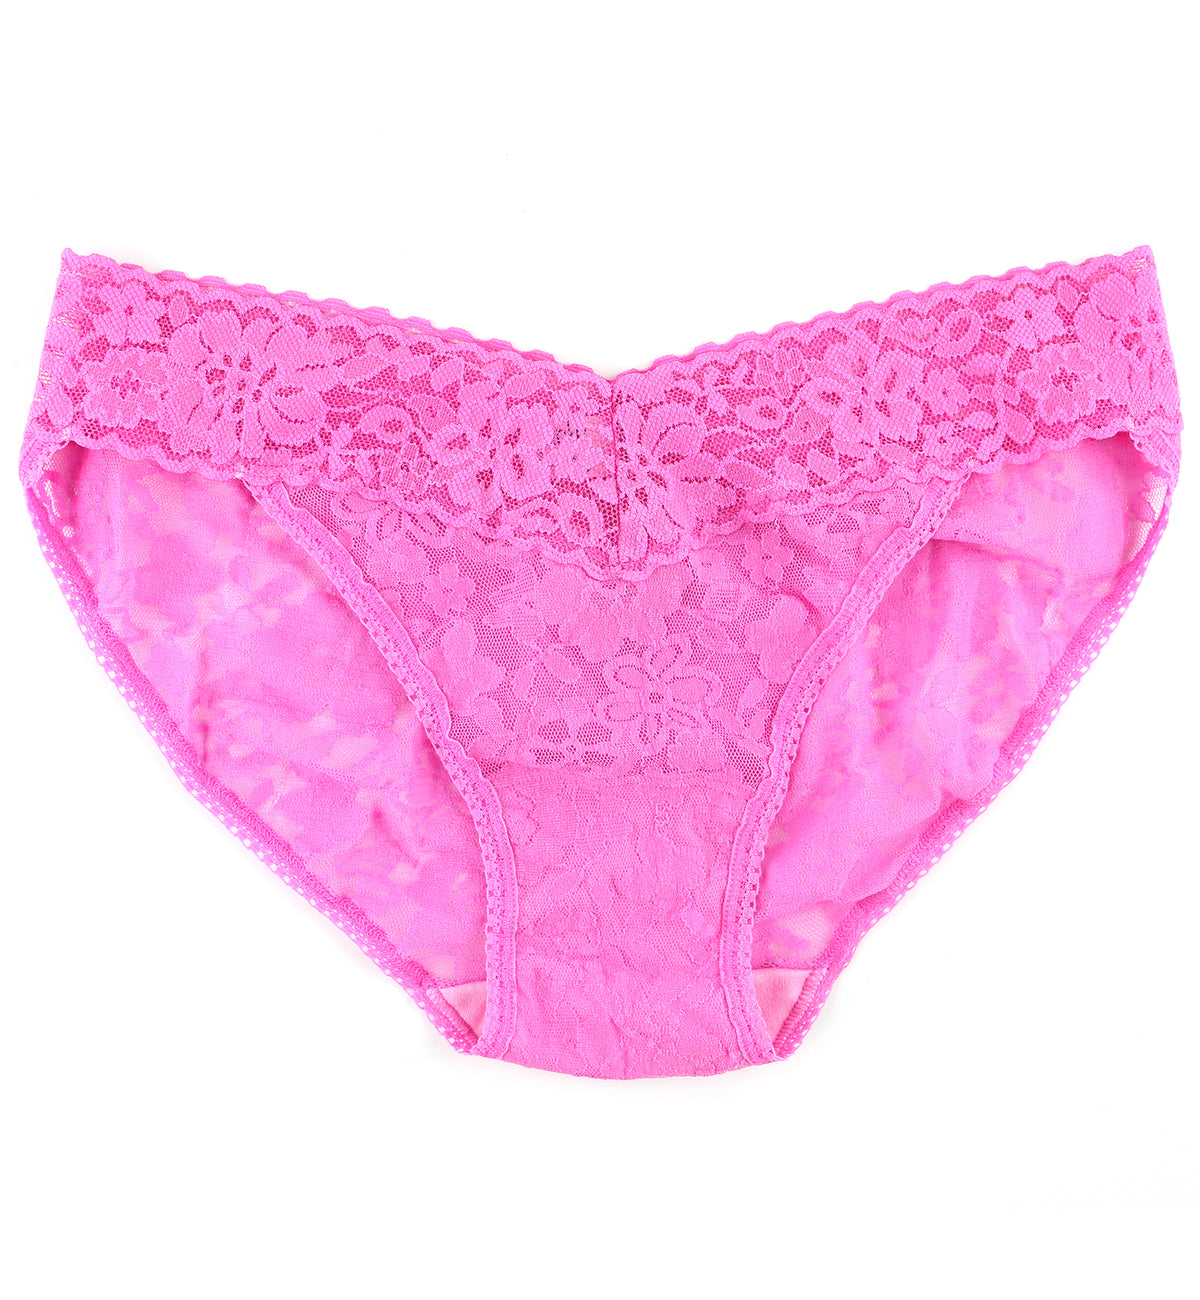 Hanky Panky Daily Lace V-kini (772371P),XS,Dream House Pink - Dream House Pink,XS